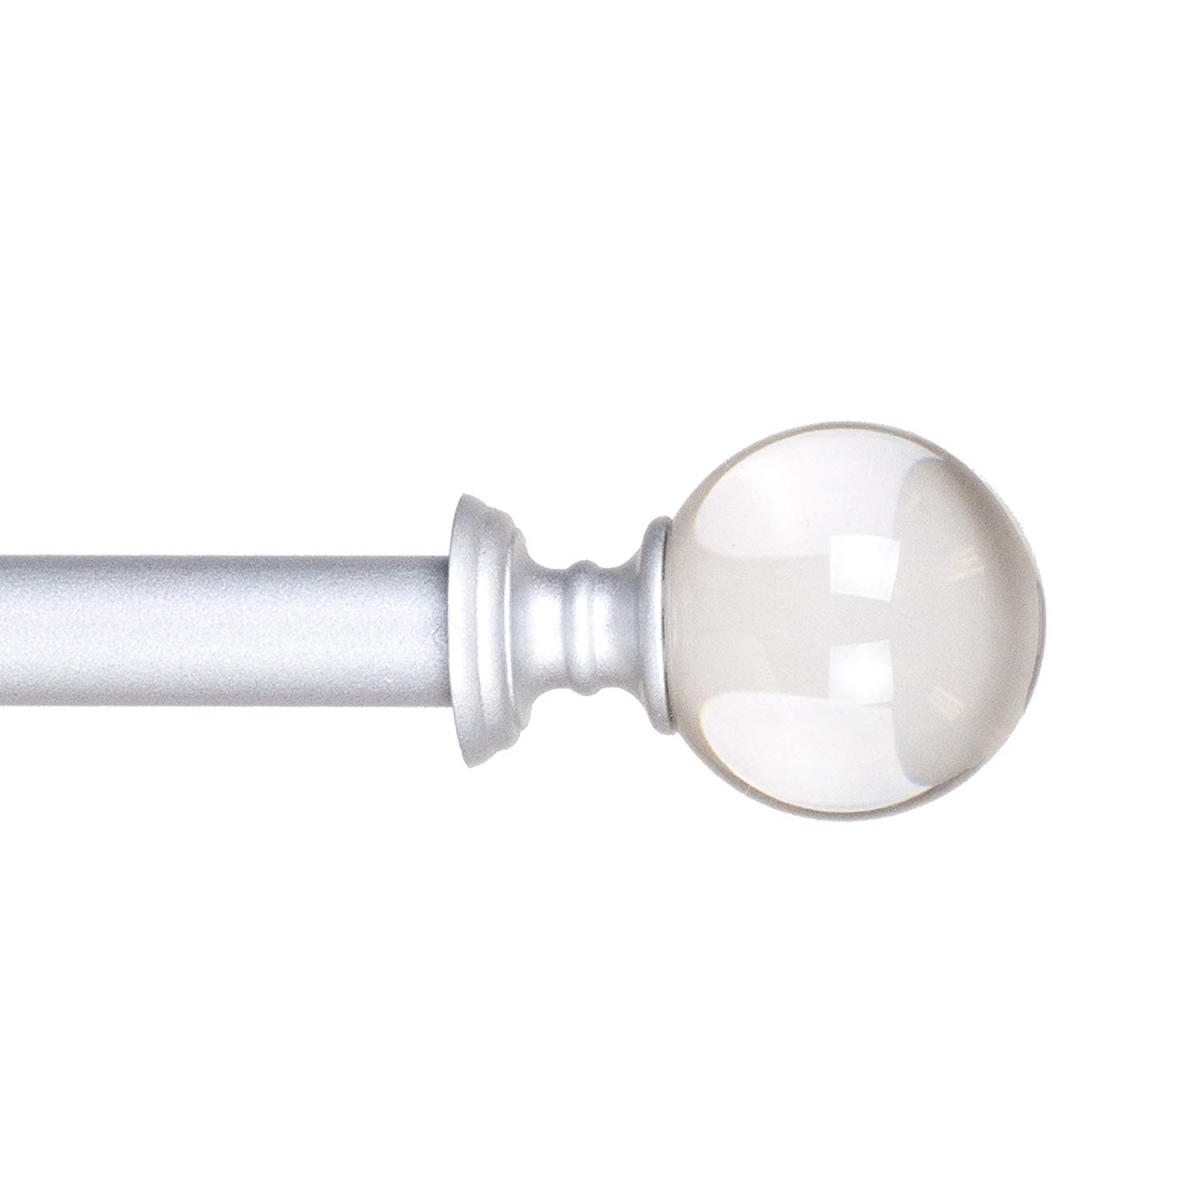 63a-03095 Crystal Ball Curtain Rod, Silver - 62-144 In., 0.75 In.